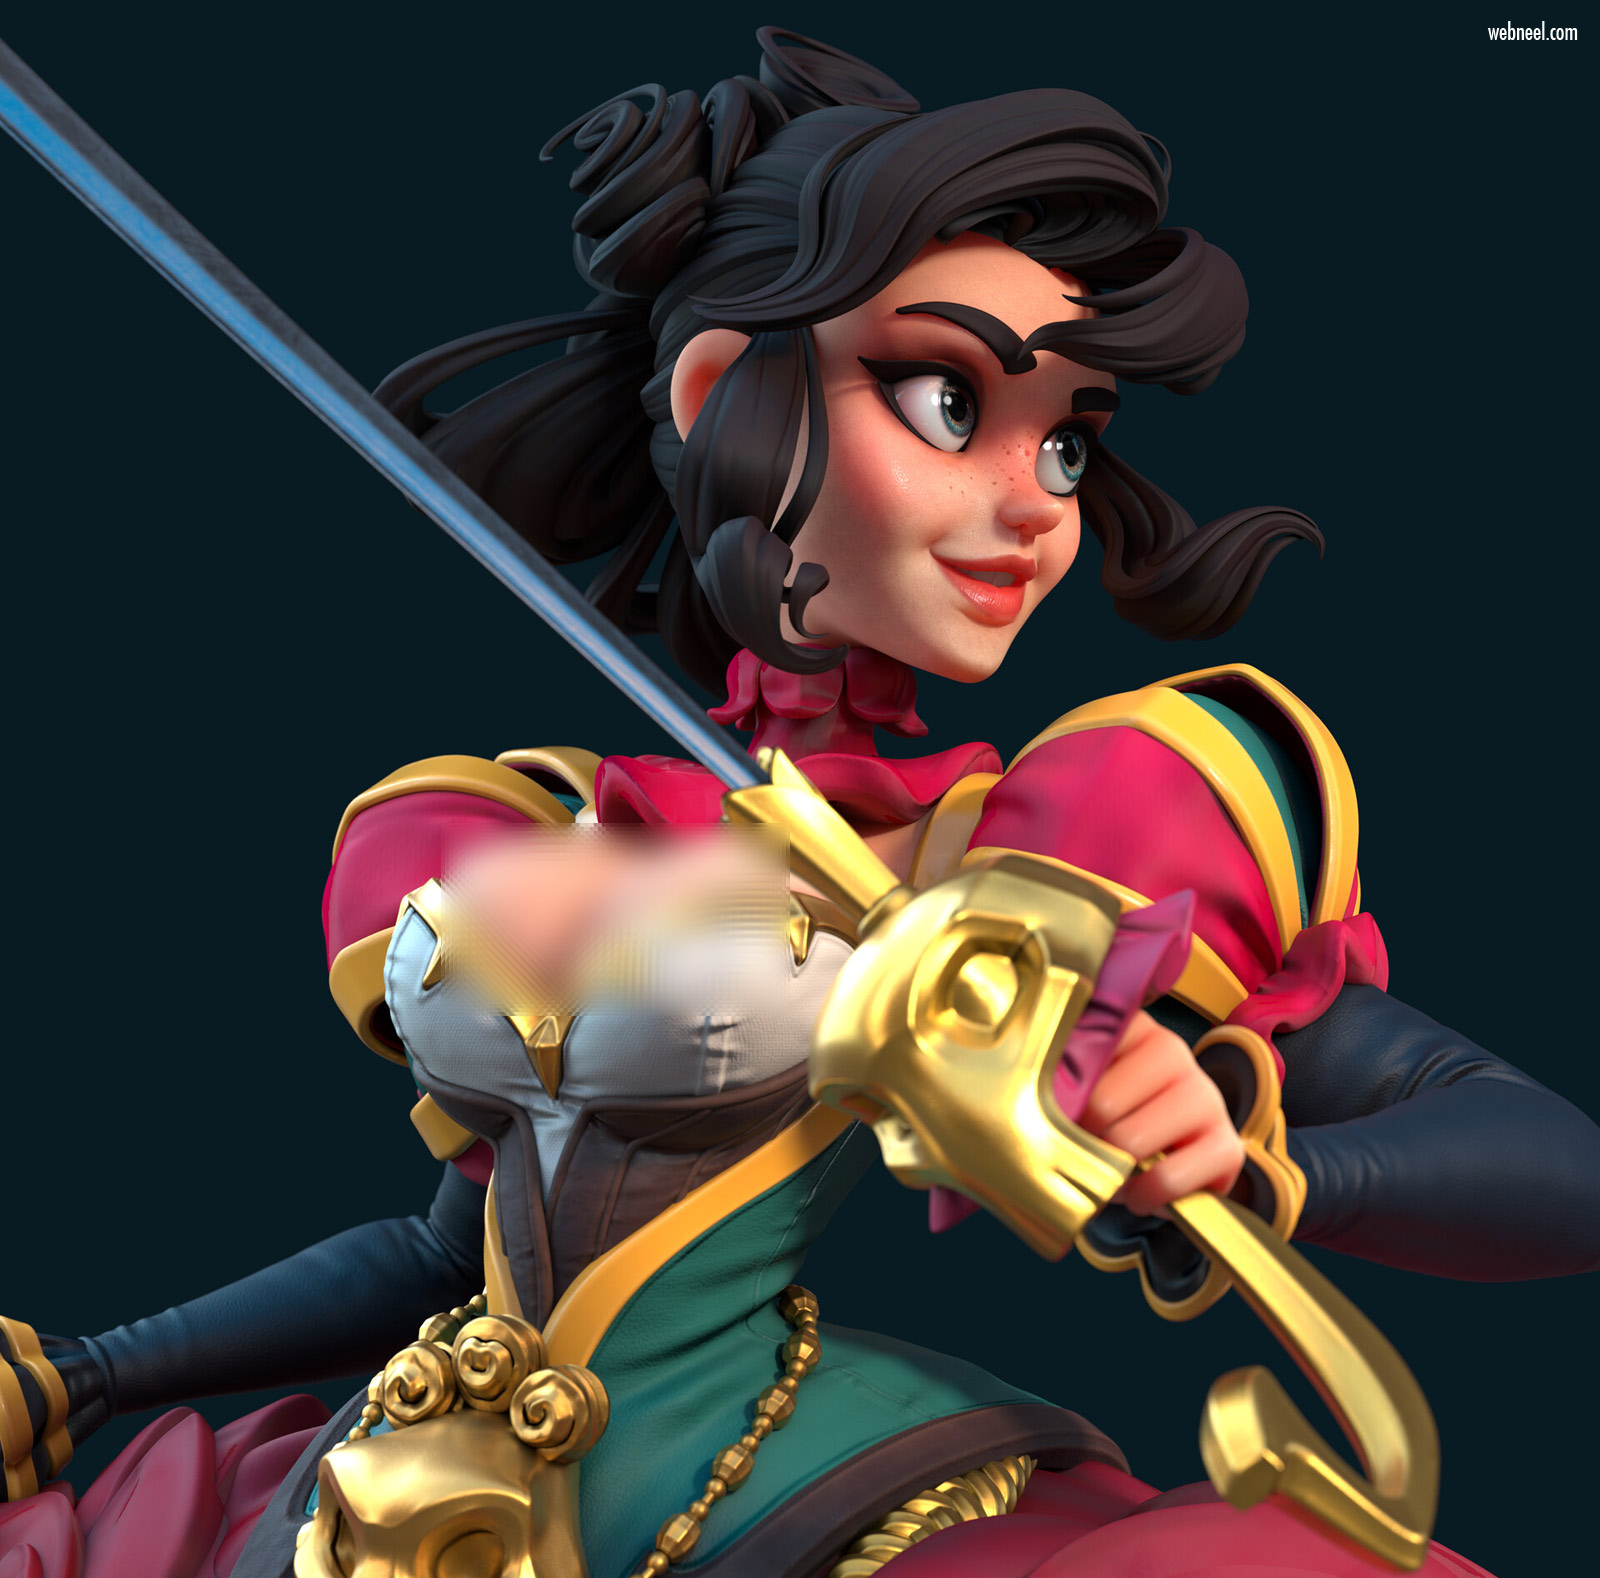 3d model character design girl fighter fantasy by chen longfei